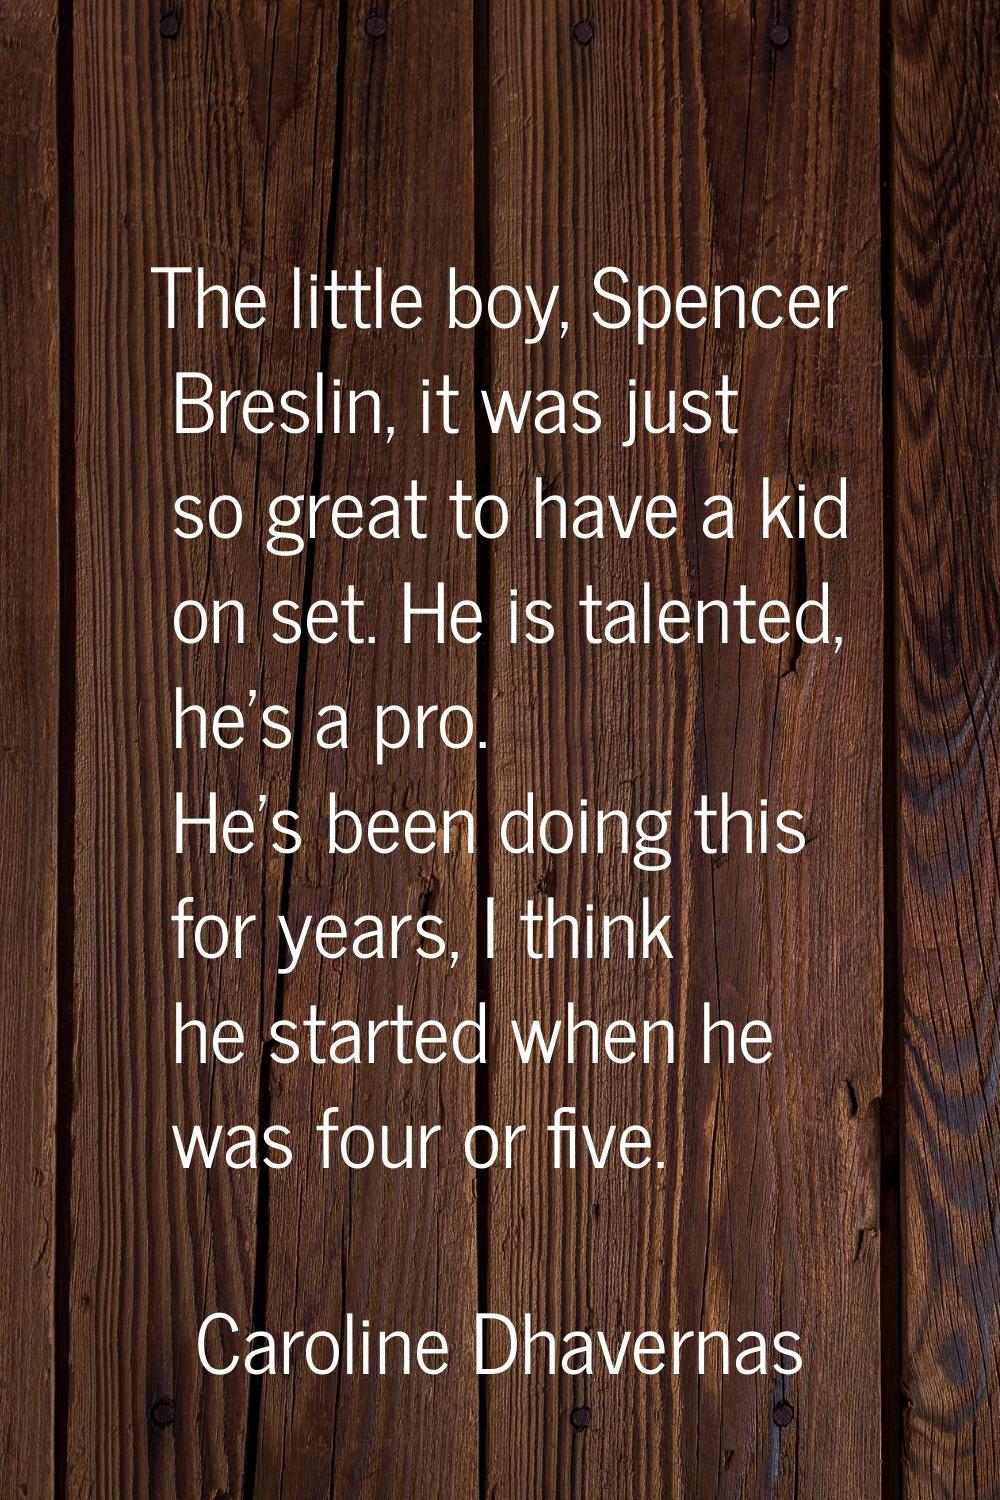 The little boy, Spencer Breslin, it was just so great to have a kid on set. He is talented, he's a 